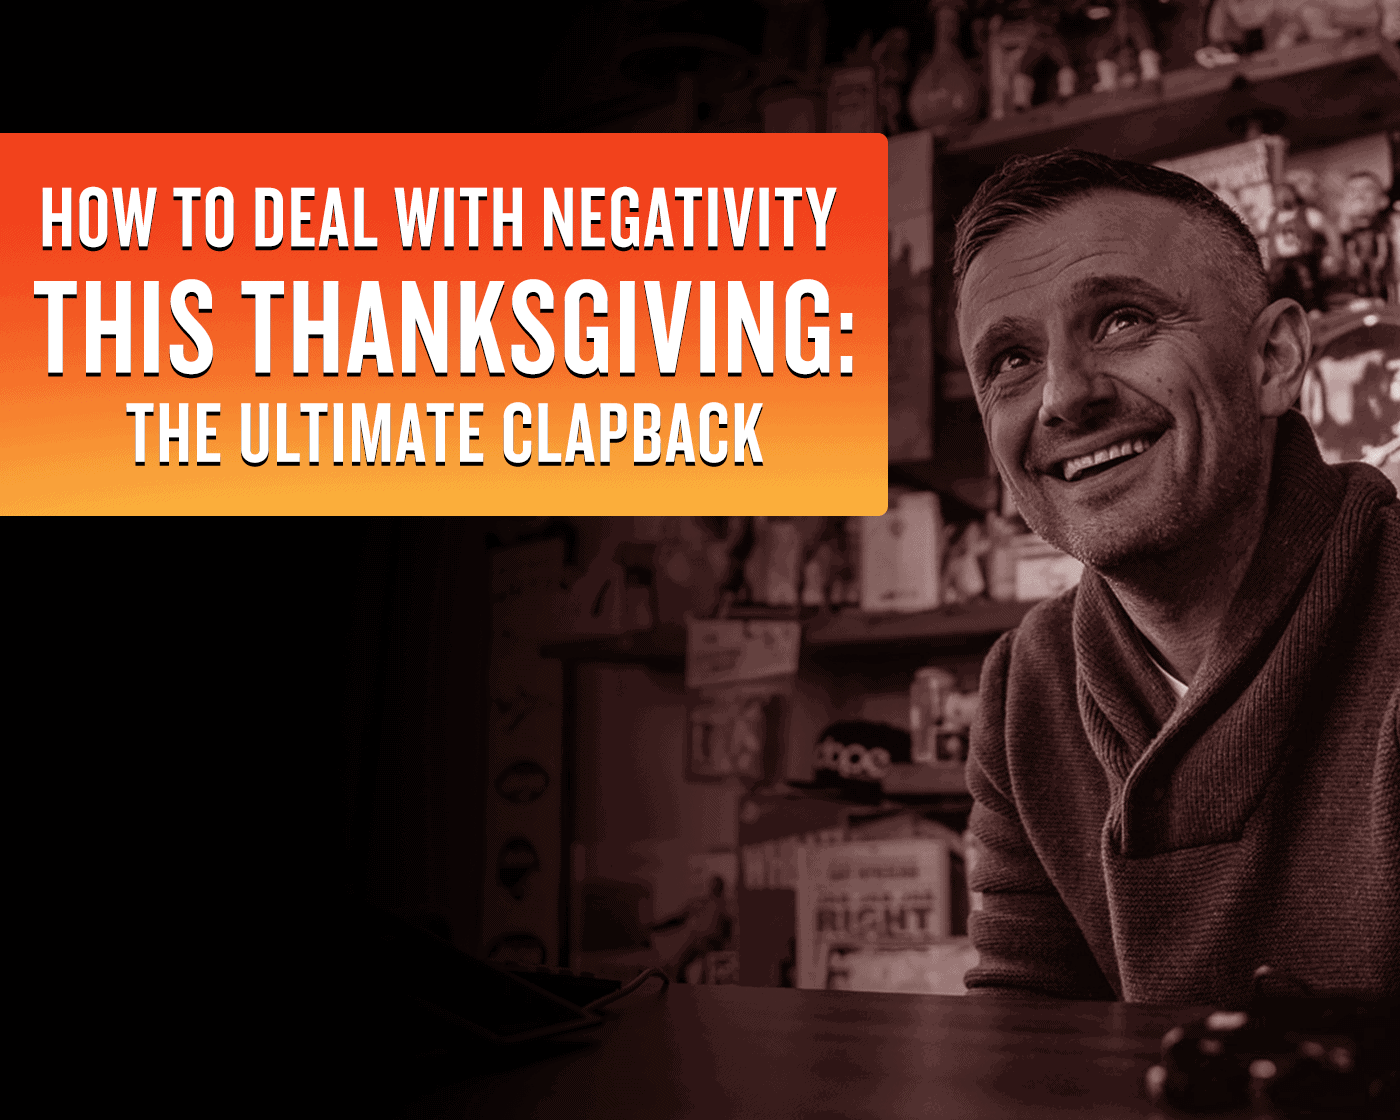 How to deal with negativity this Thanksgiving: The ultimate clapback